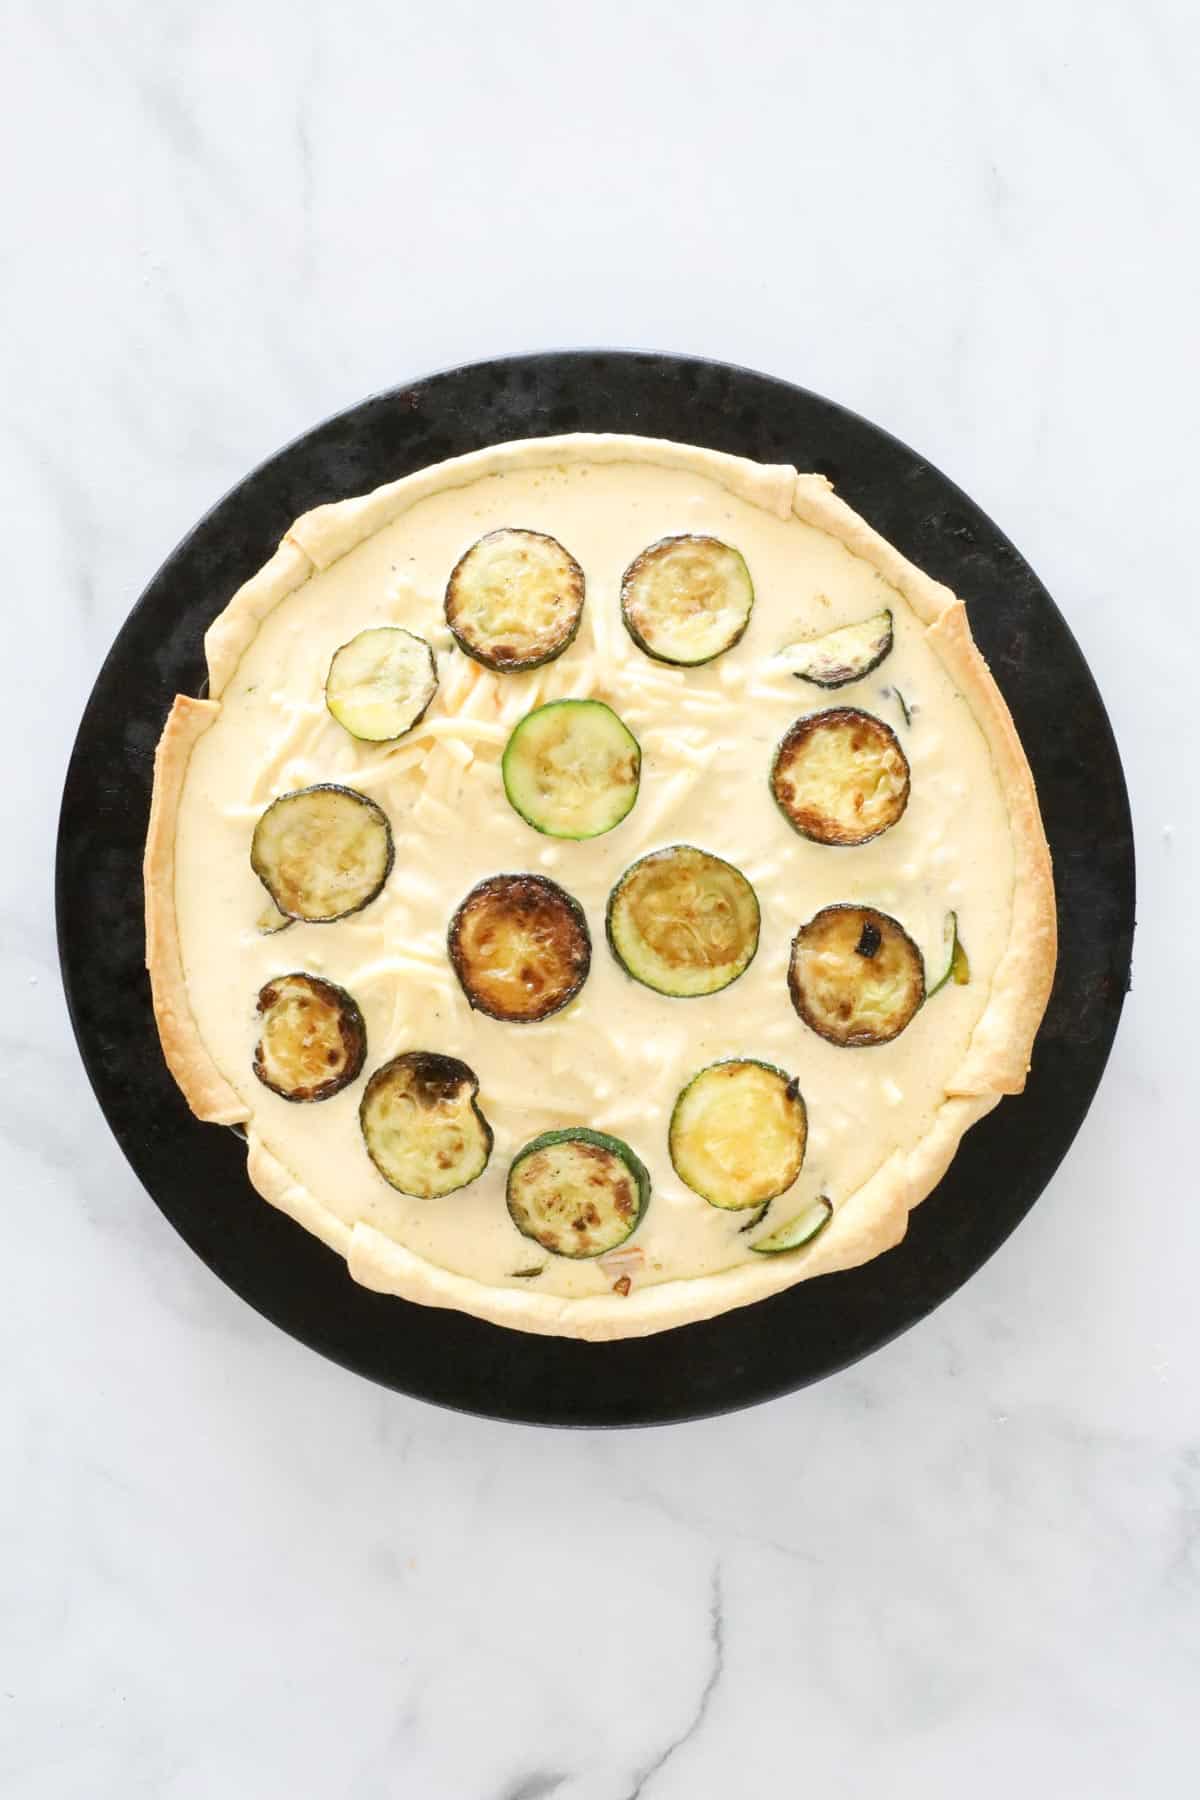 Unbaked quiche in a pan with extra slices of zucchini on top.